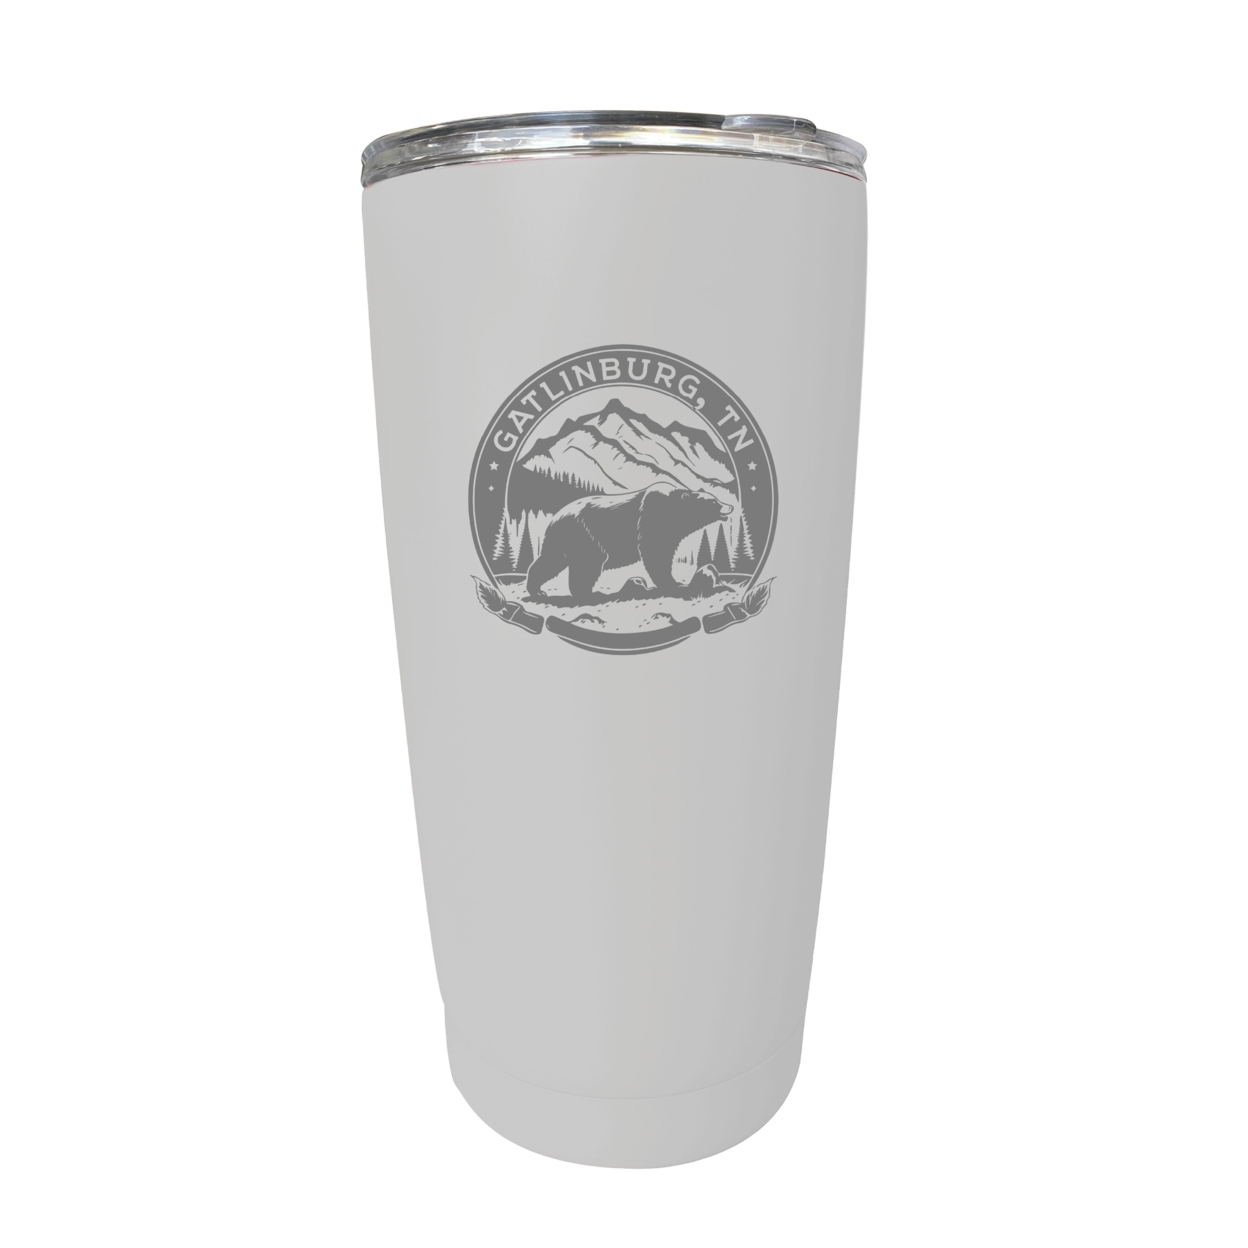 Gatlinburg Tennessee Laser Etched Souvenir 16 Oz Stainless Steel Insulated Tumbler - White